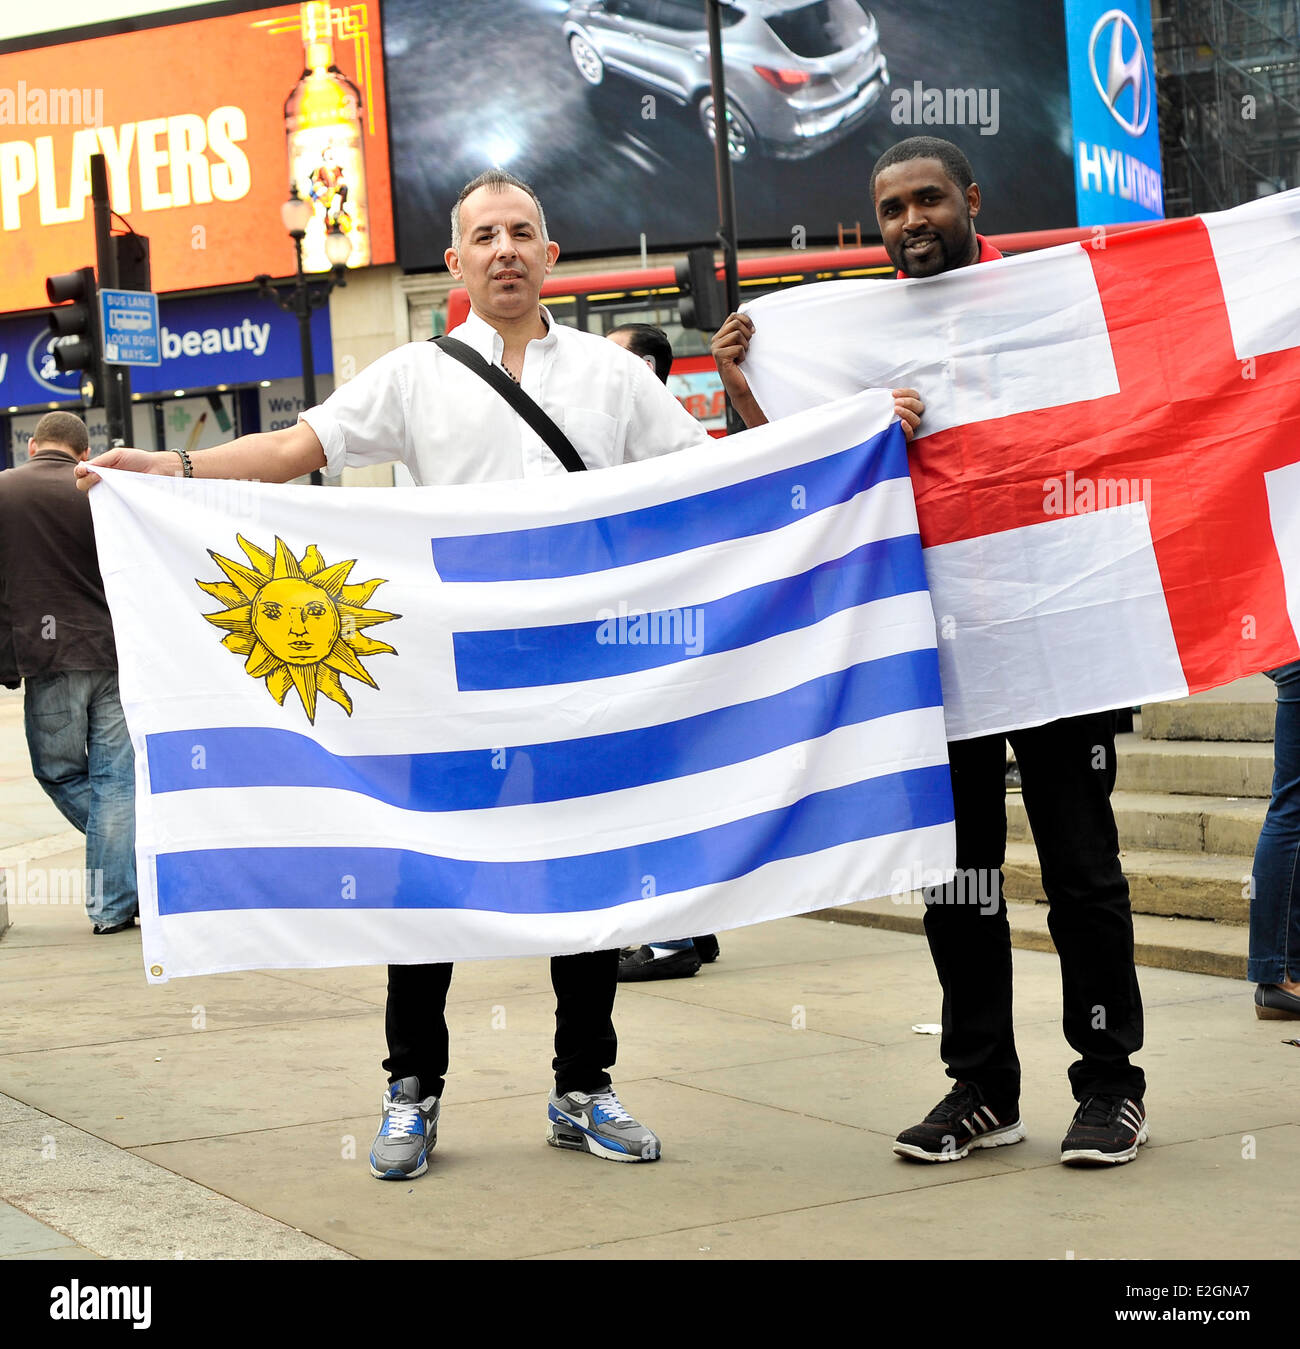 London, UK. 19th June, 2014. Fans from England, Uruguay and Colombia supporting their national team in Piccadilly Circus, London, UK 19th June 2014 Credit:  Giulia Fiori/Alamy Live News Stock Photo